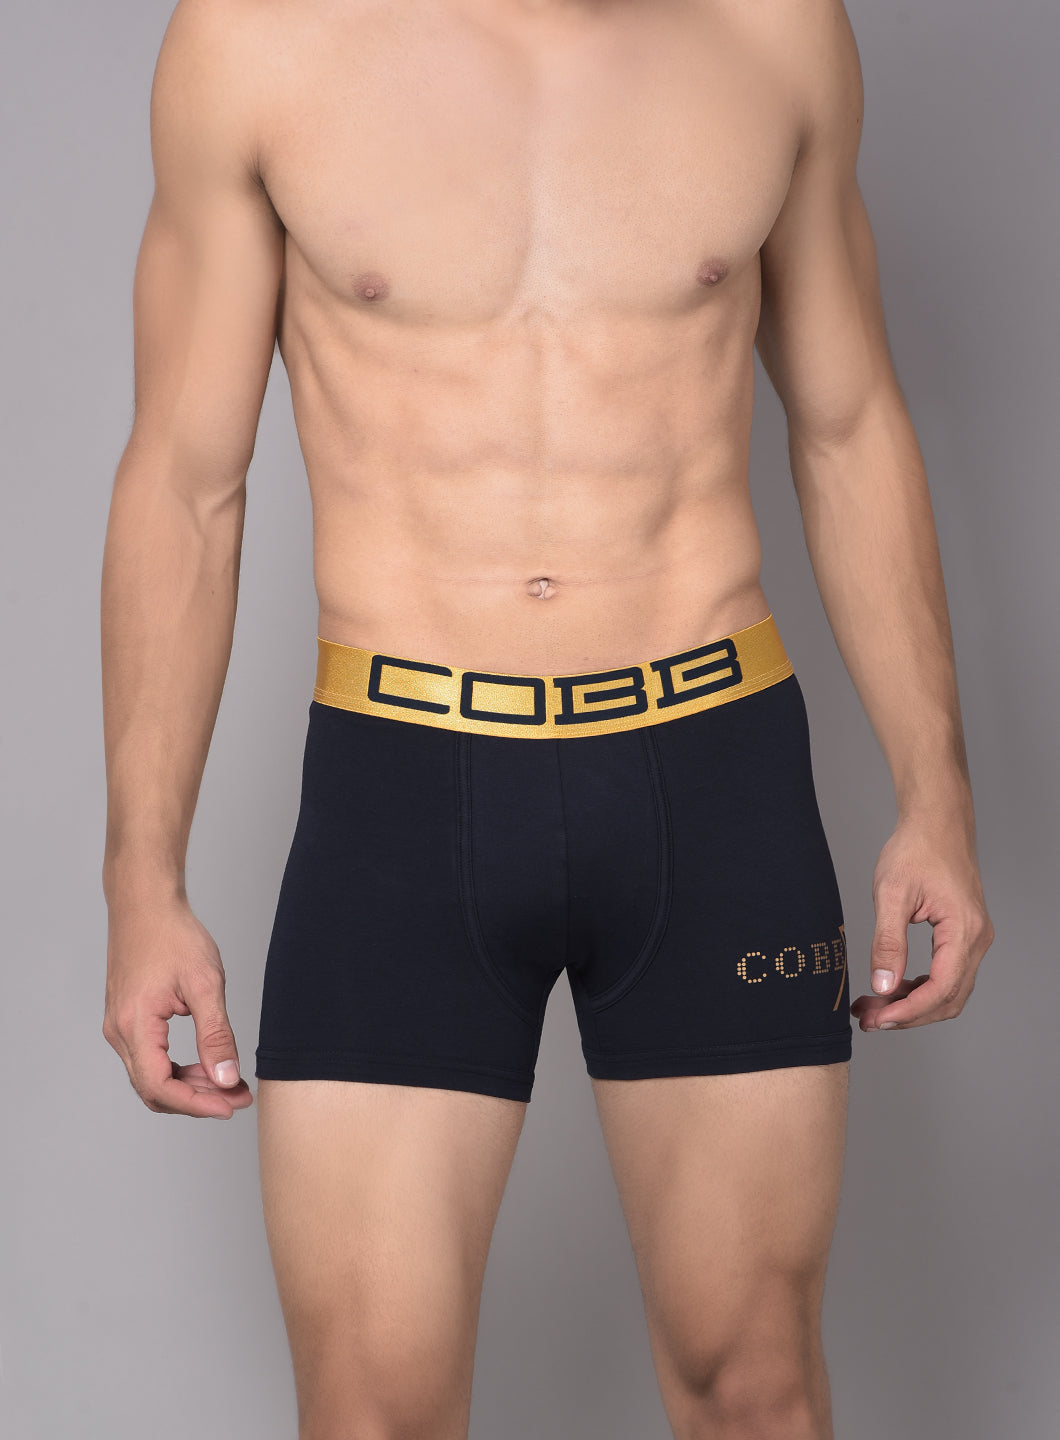 Cobb Mens Cotton Black and Navy Solid Premium Trunk (Pack of 2)